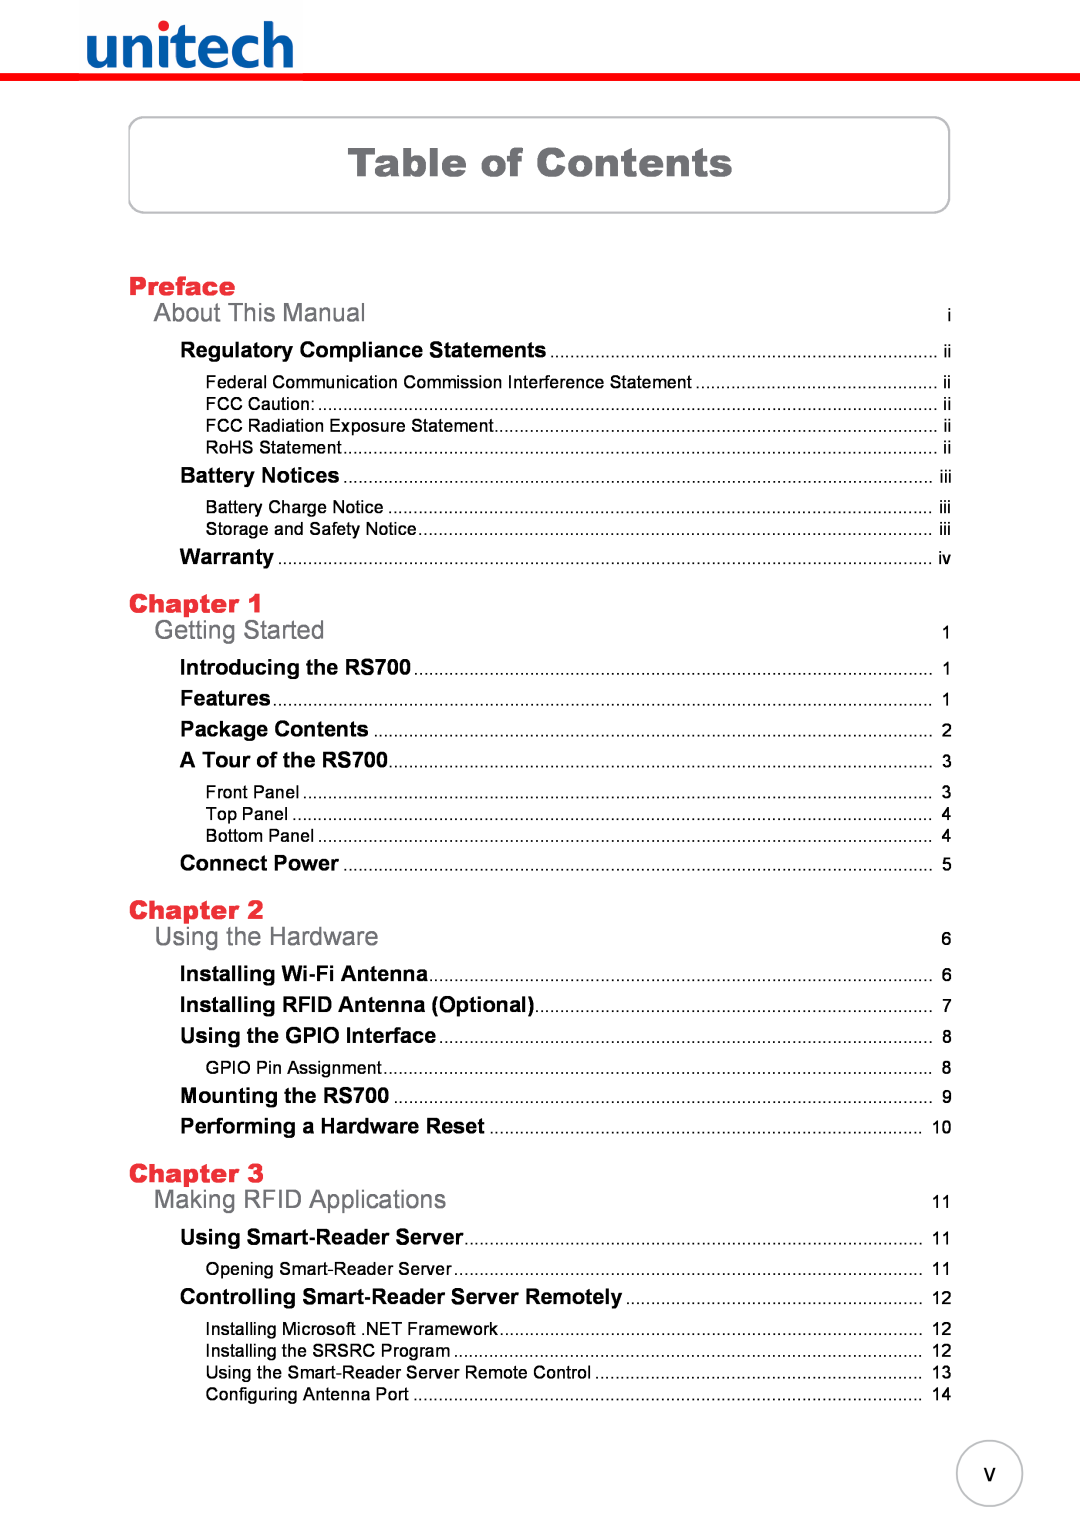 Unitech RS700 user manual Table of Contents, Preface, About This Manual, Chapter, Getting Started, Using the Hardware 